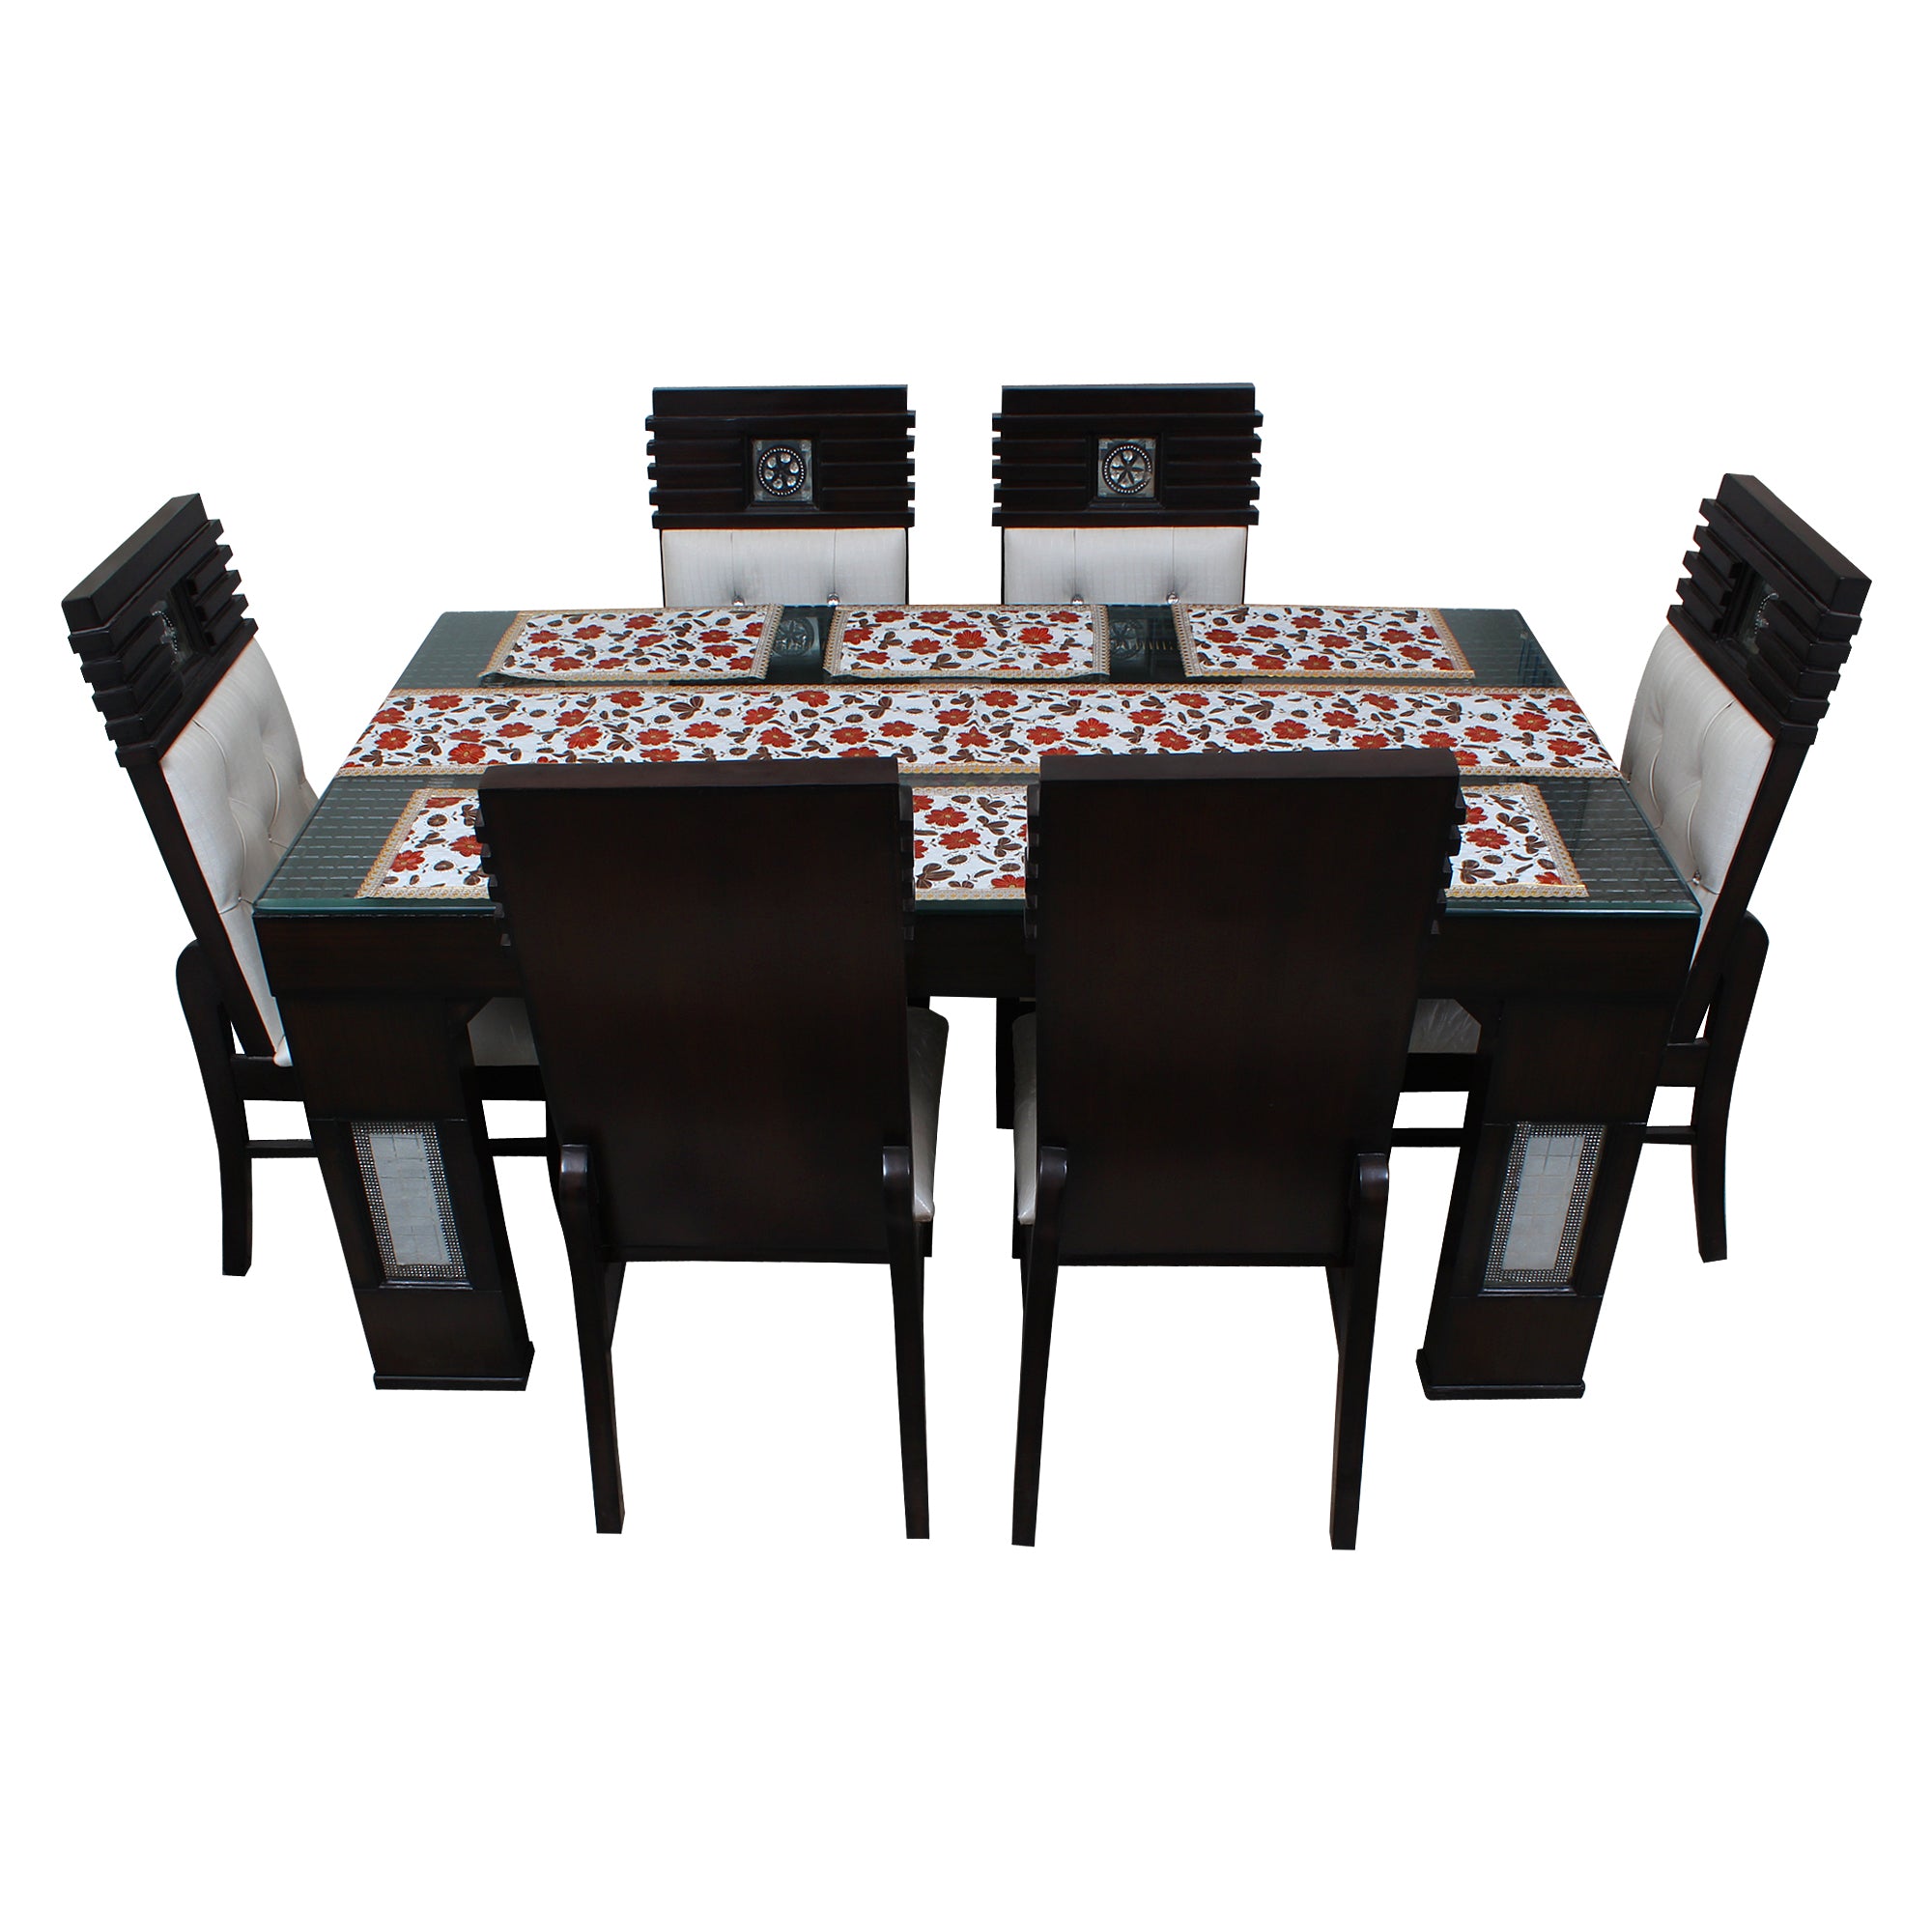 Waterproof & Dustproof Dining Table Runner With 6 Placemats, SA20 - Dream Care Furnishings Private Limited